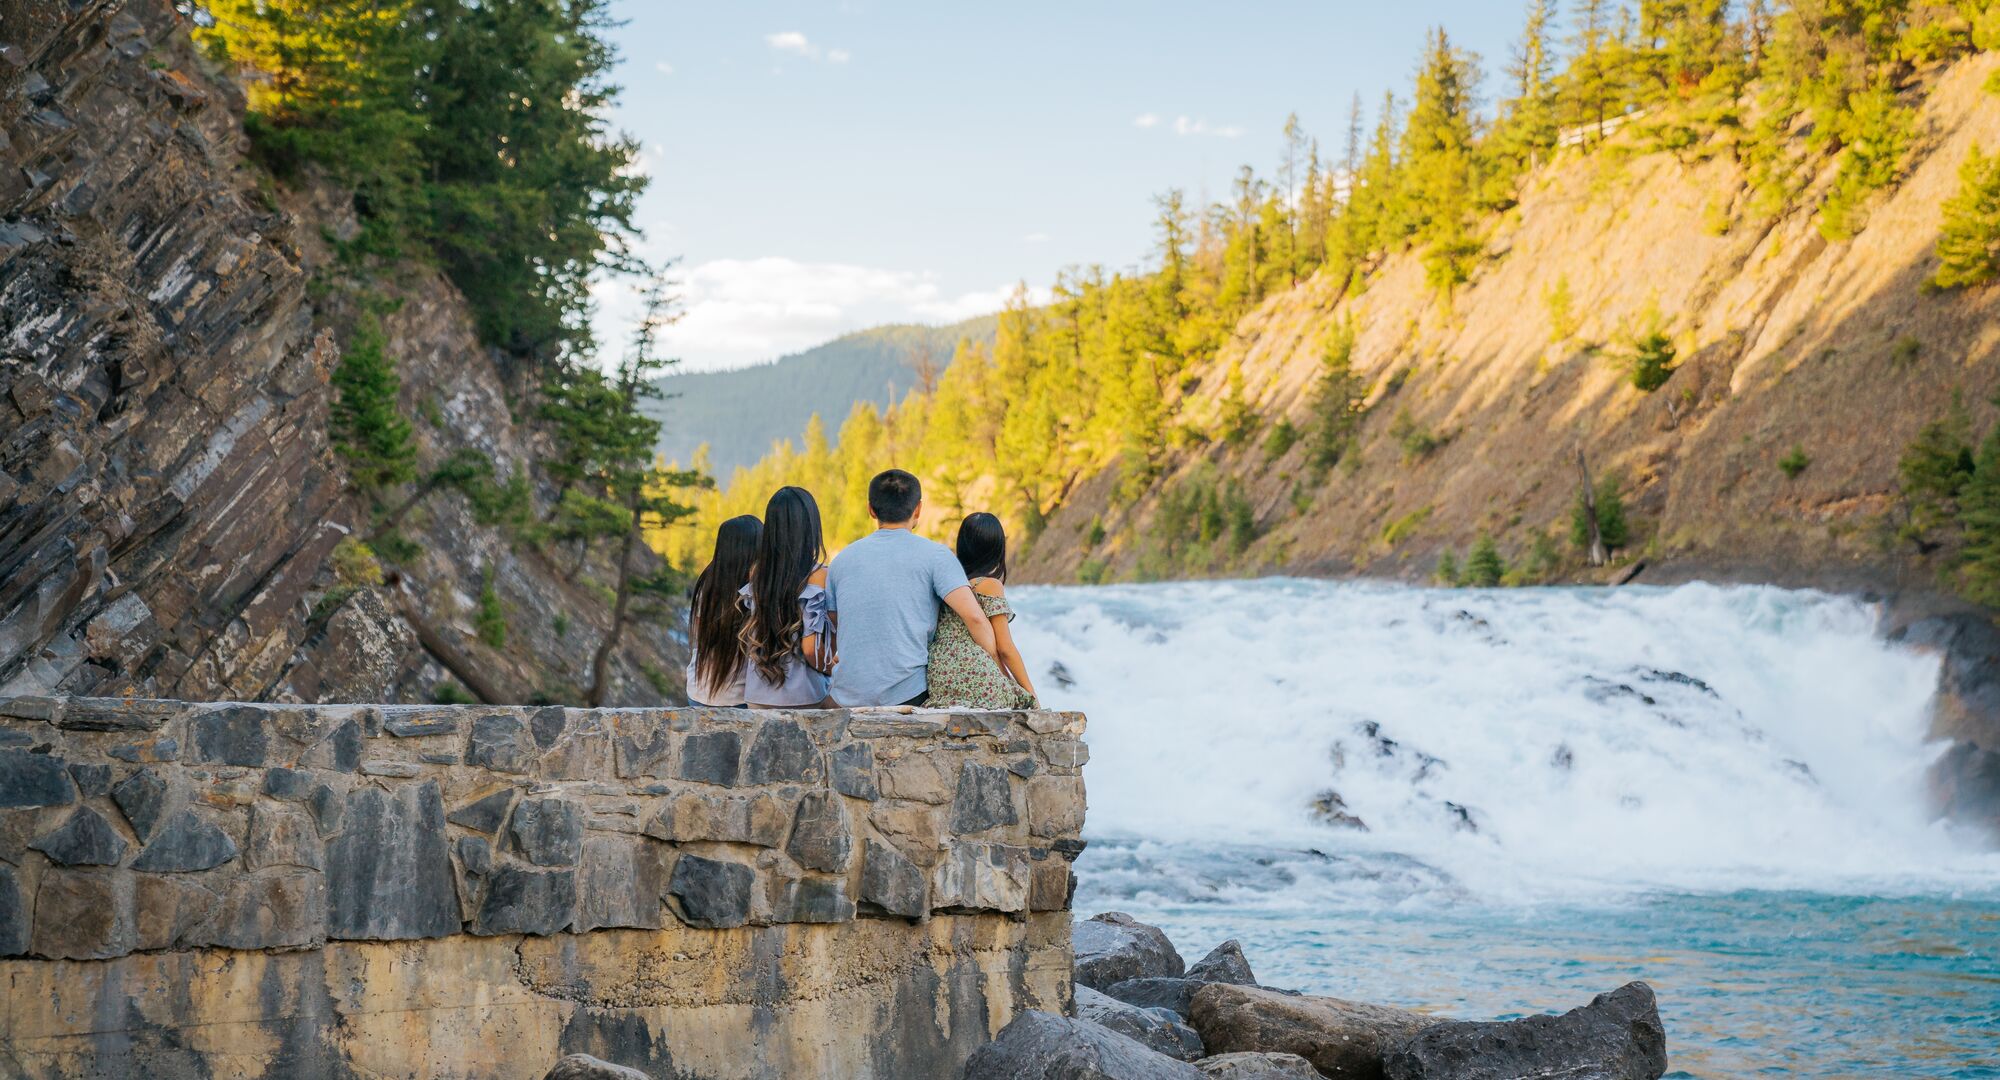 A family of four taking in the views at Bow Falls in the summer